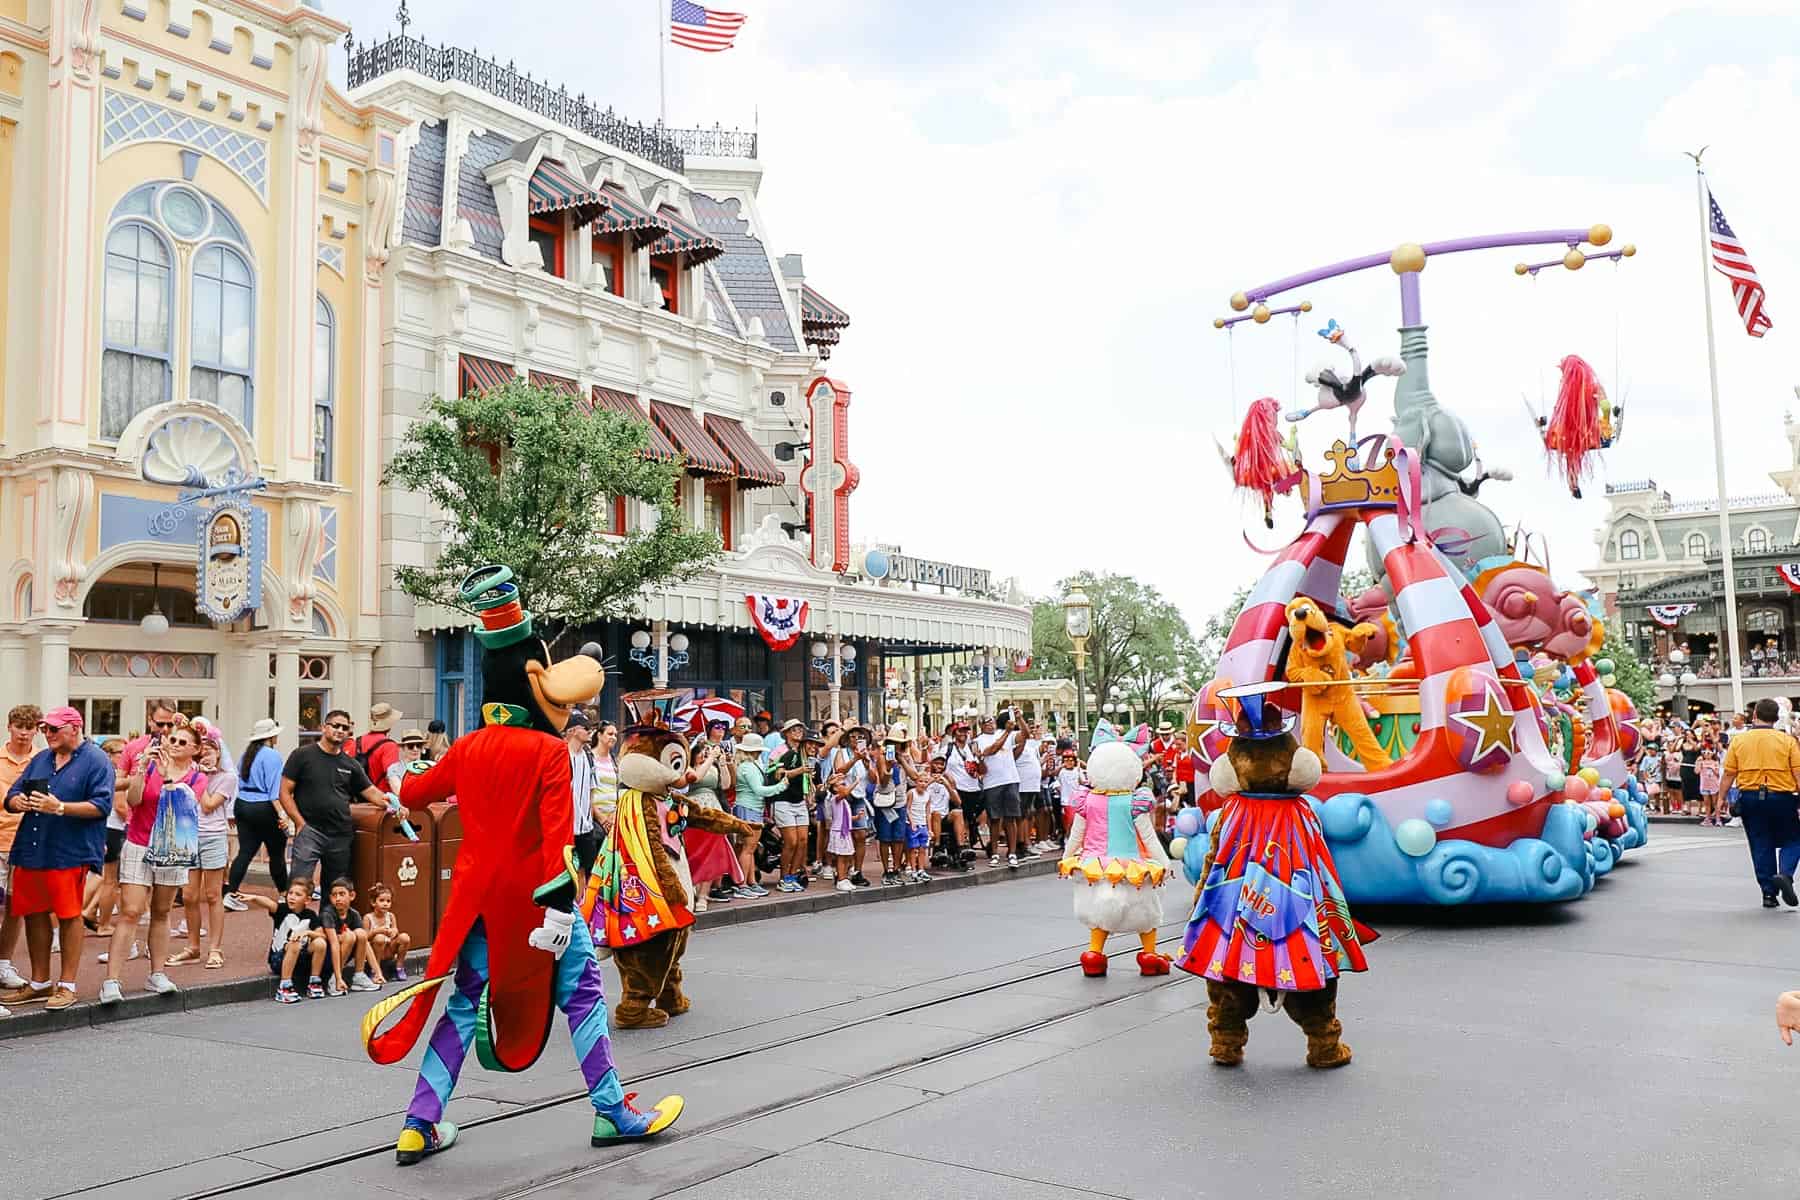 Last of the walking characters at the end of the parade include Goofy. 